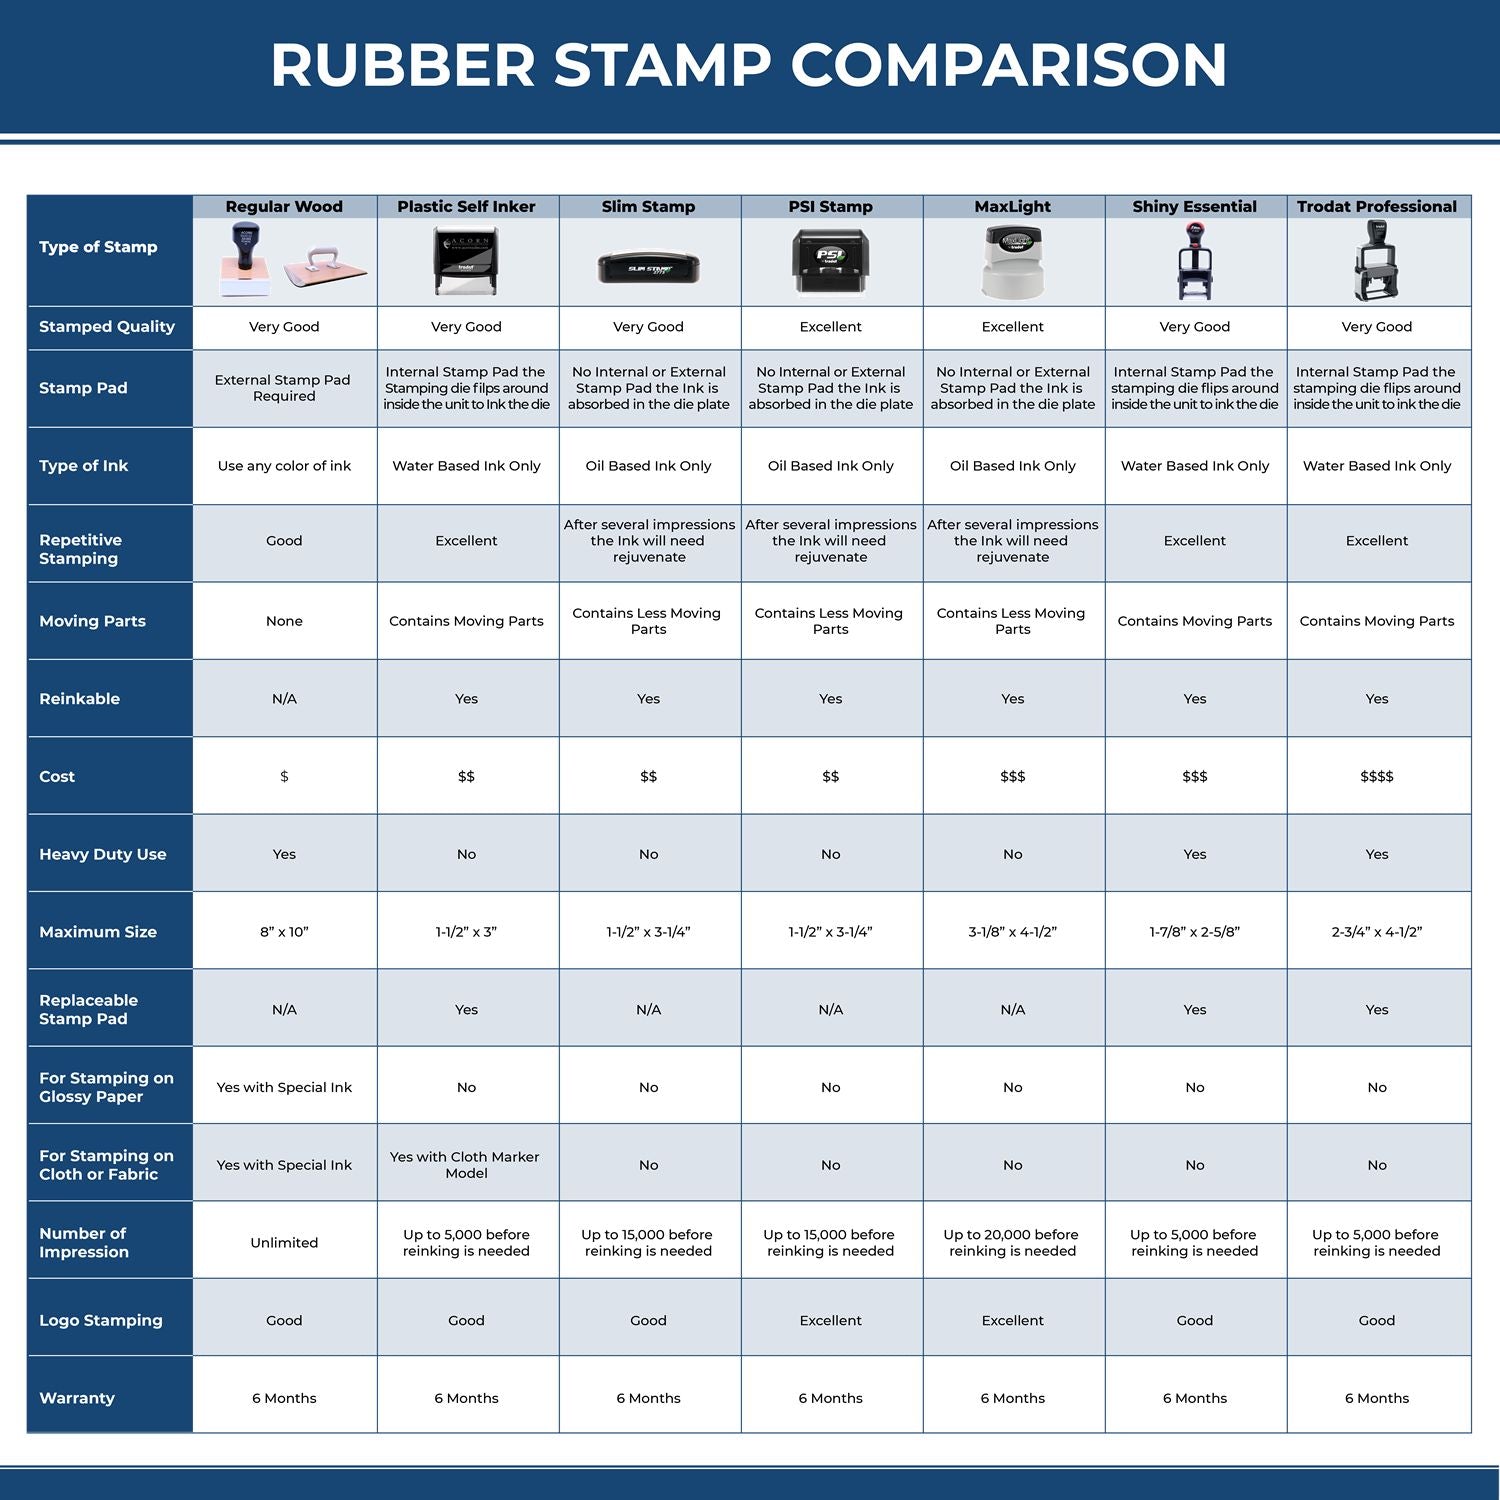 A comparison chart for the different types of mount models available for the Self-Inking Iowa PE Stamp.